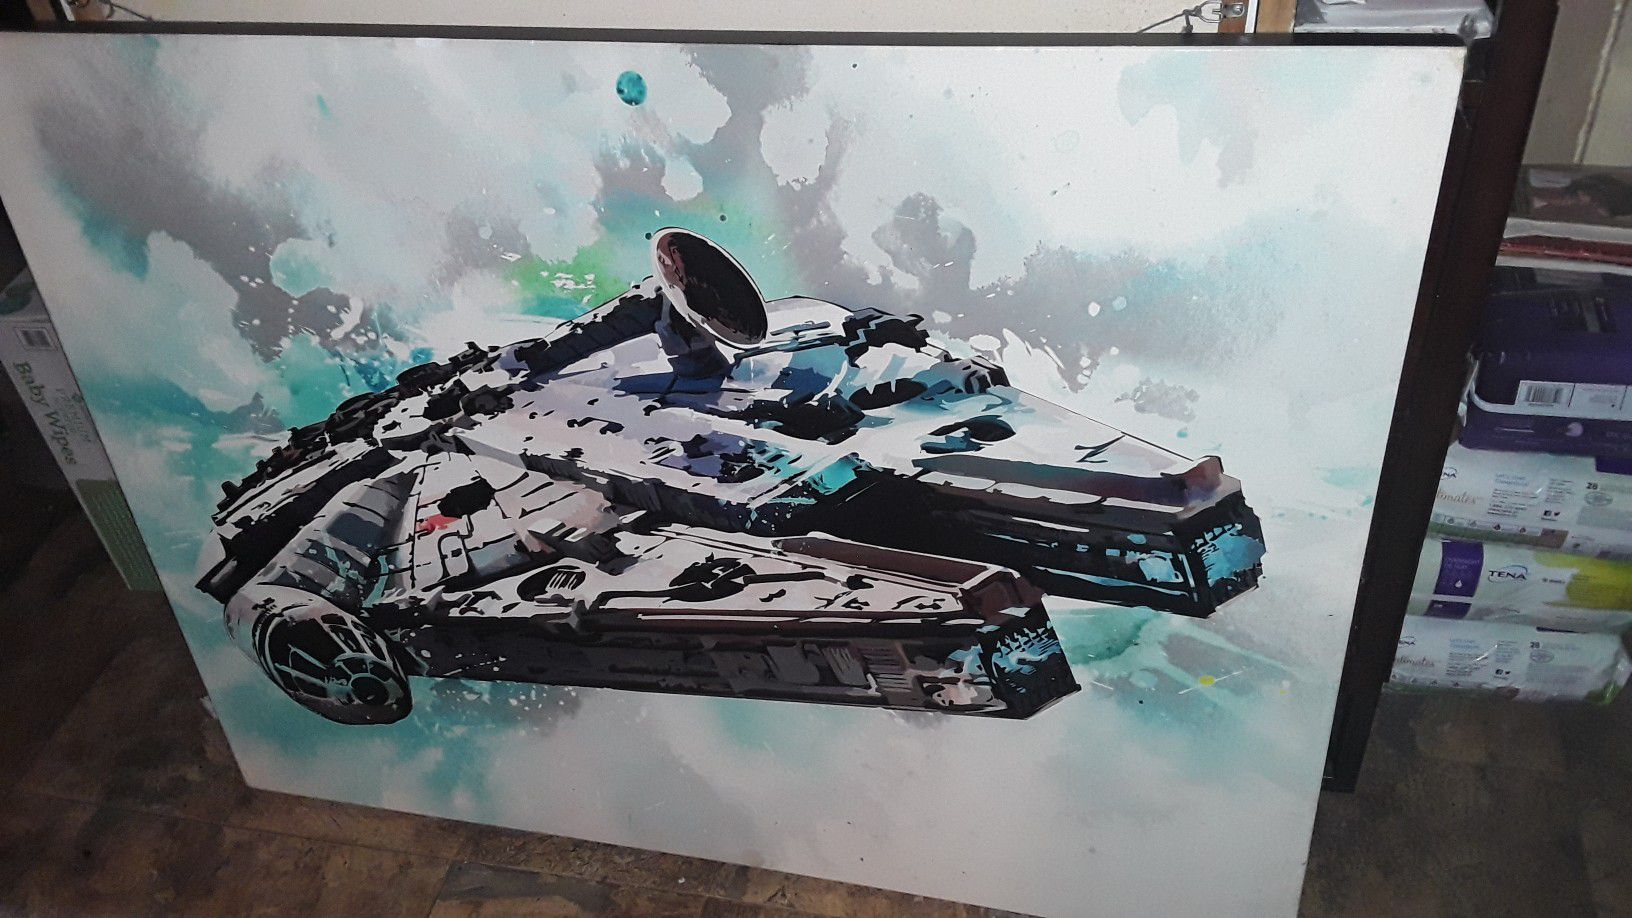 Large hand-painted Custom Canvas oil painting of the Millennium Falcon amazing work signature unknown asking 800 or best offer